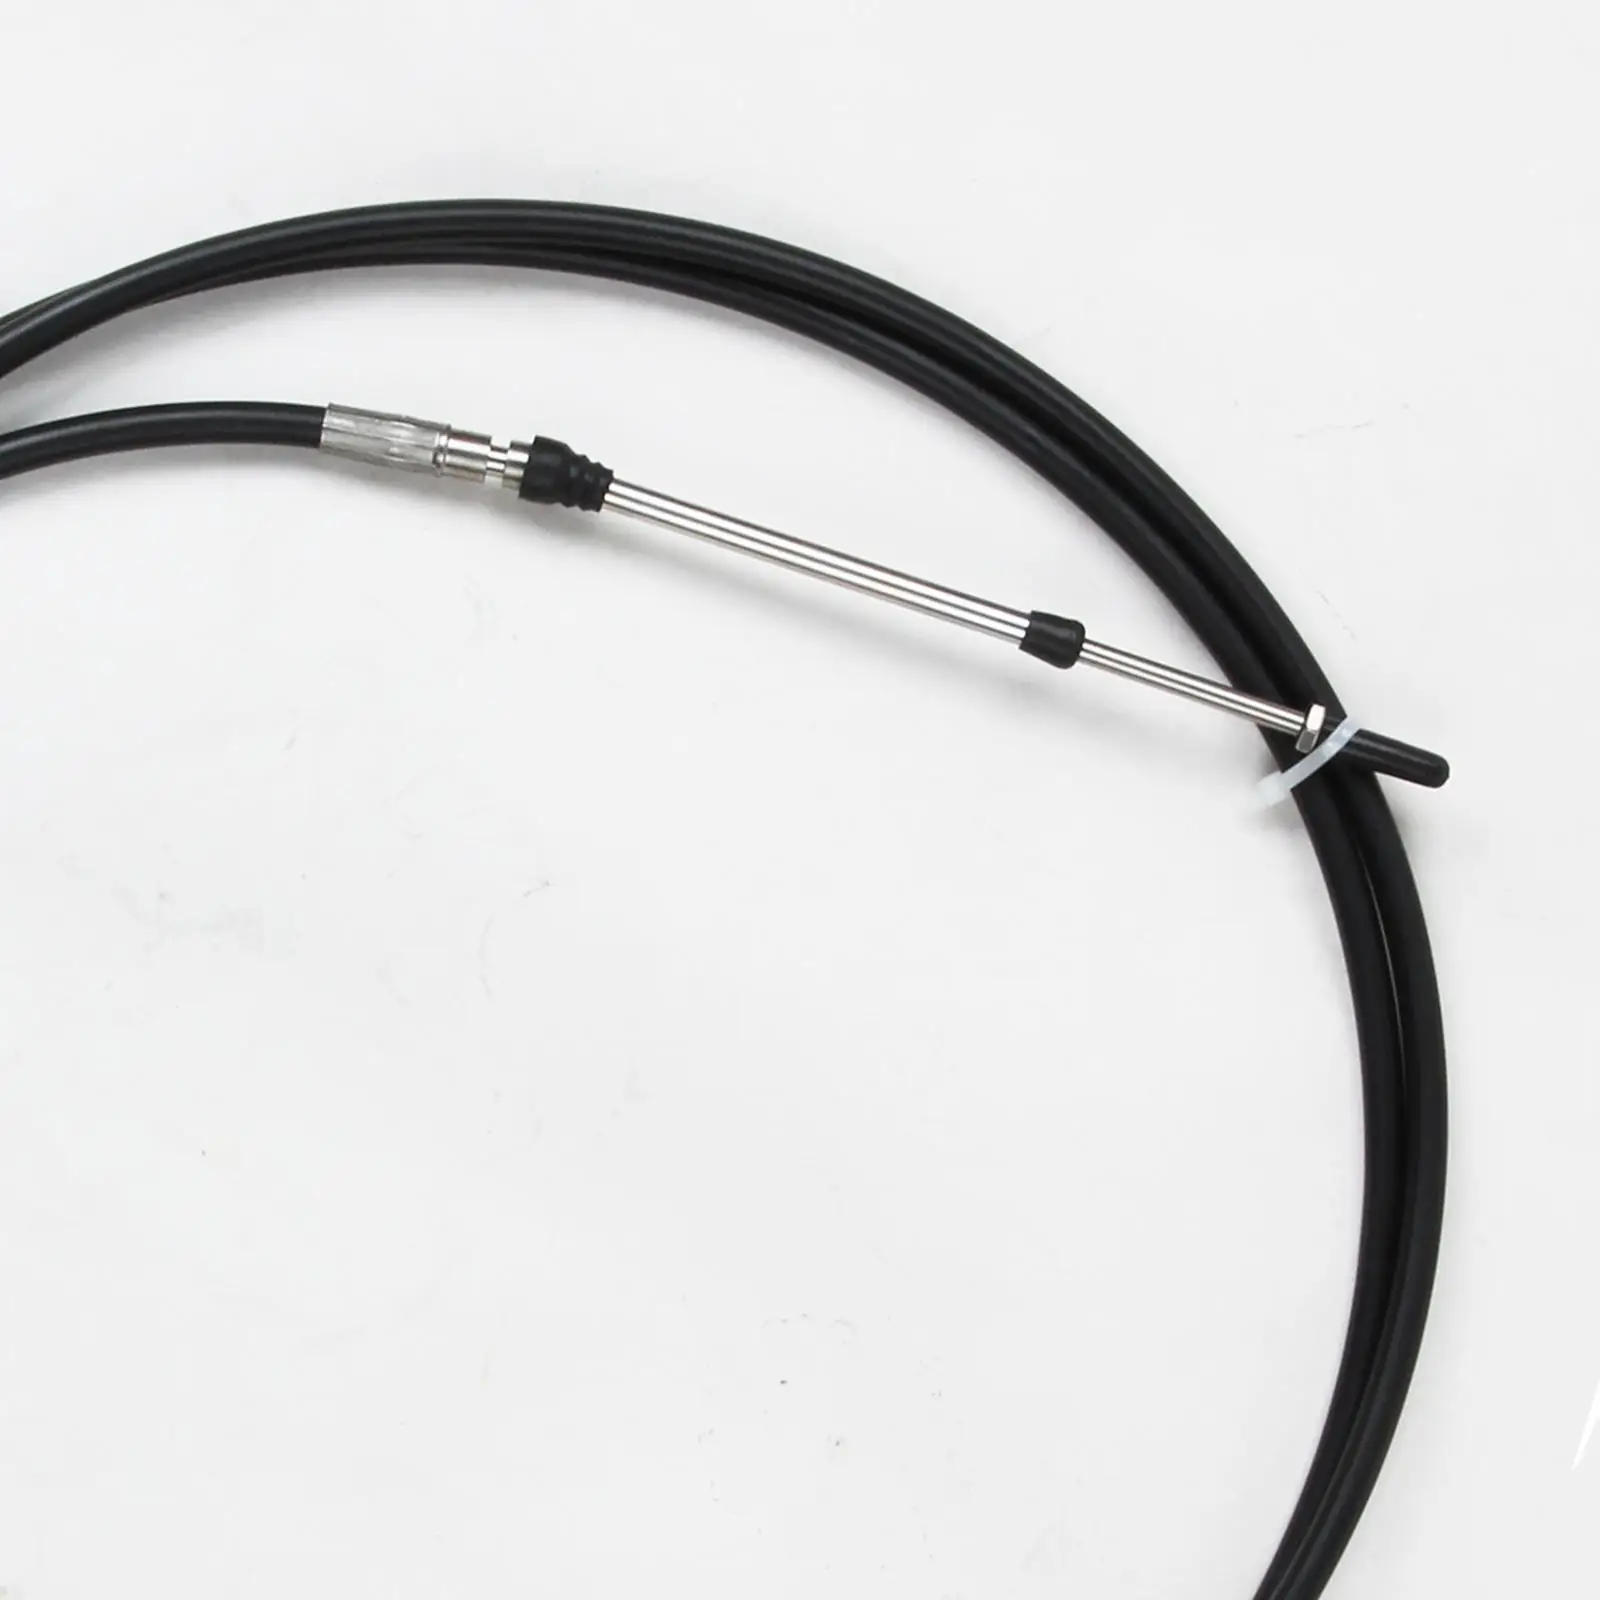 

Universal Throttle Cable Black for Marine Boat Motor Control Lever 19 FT